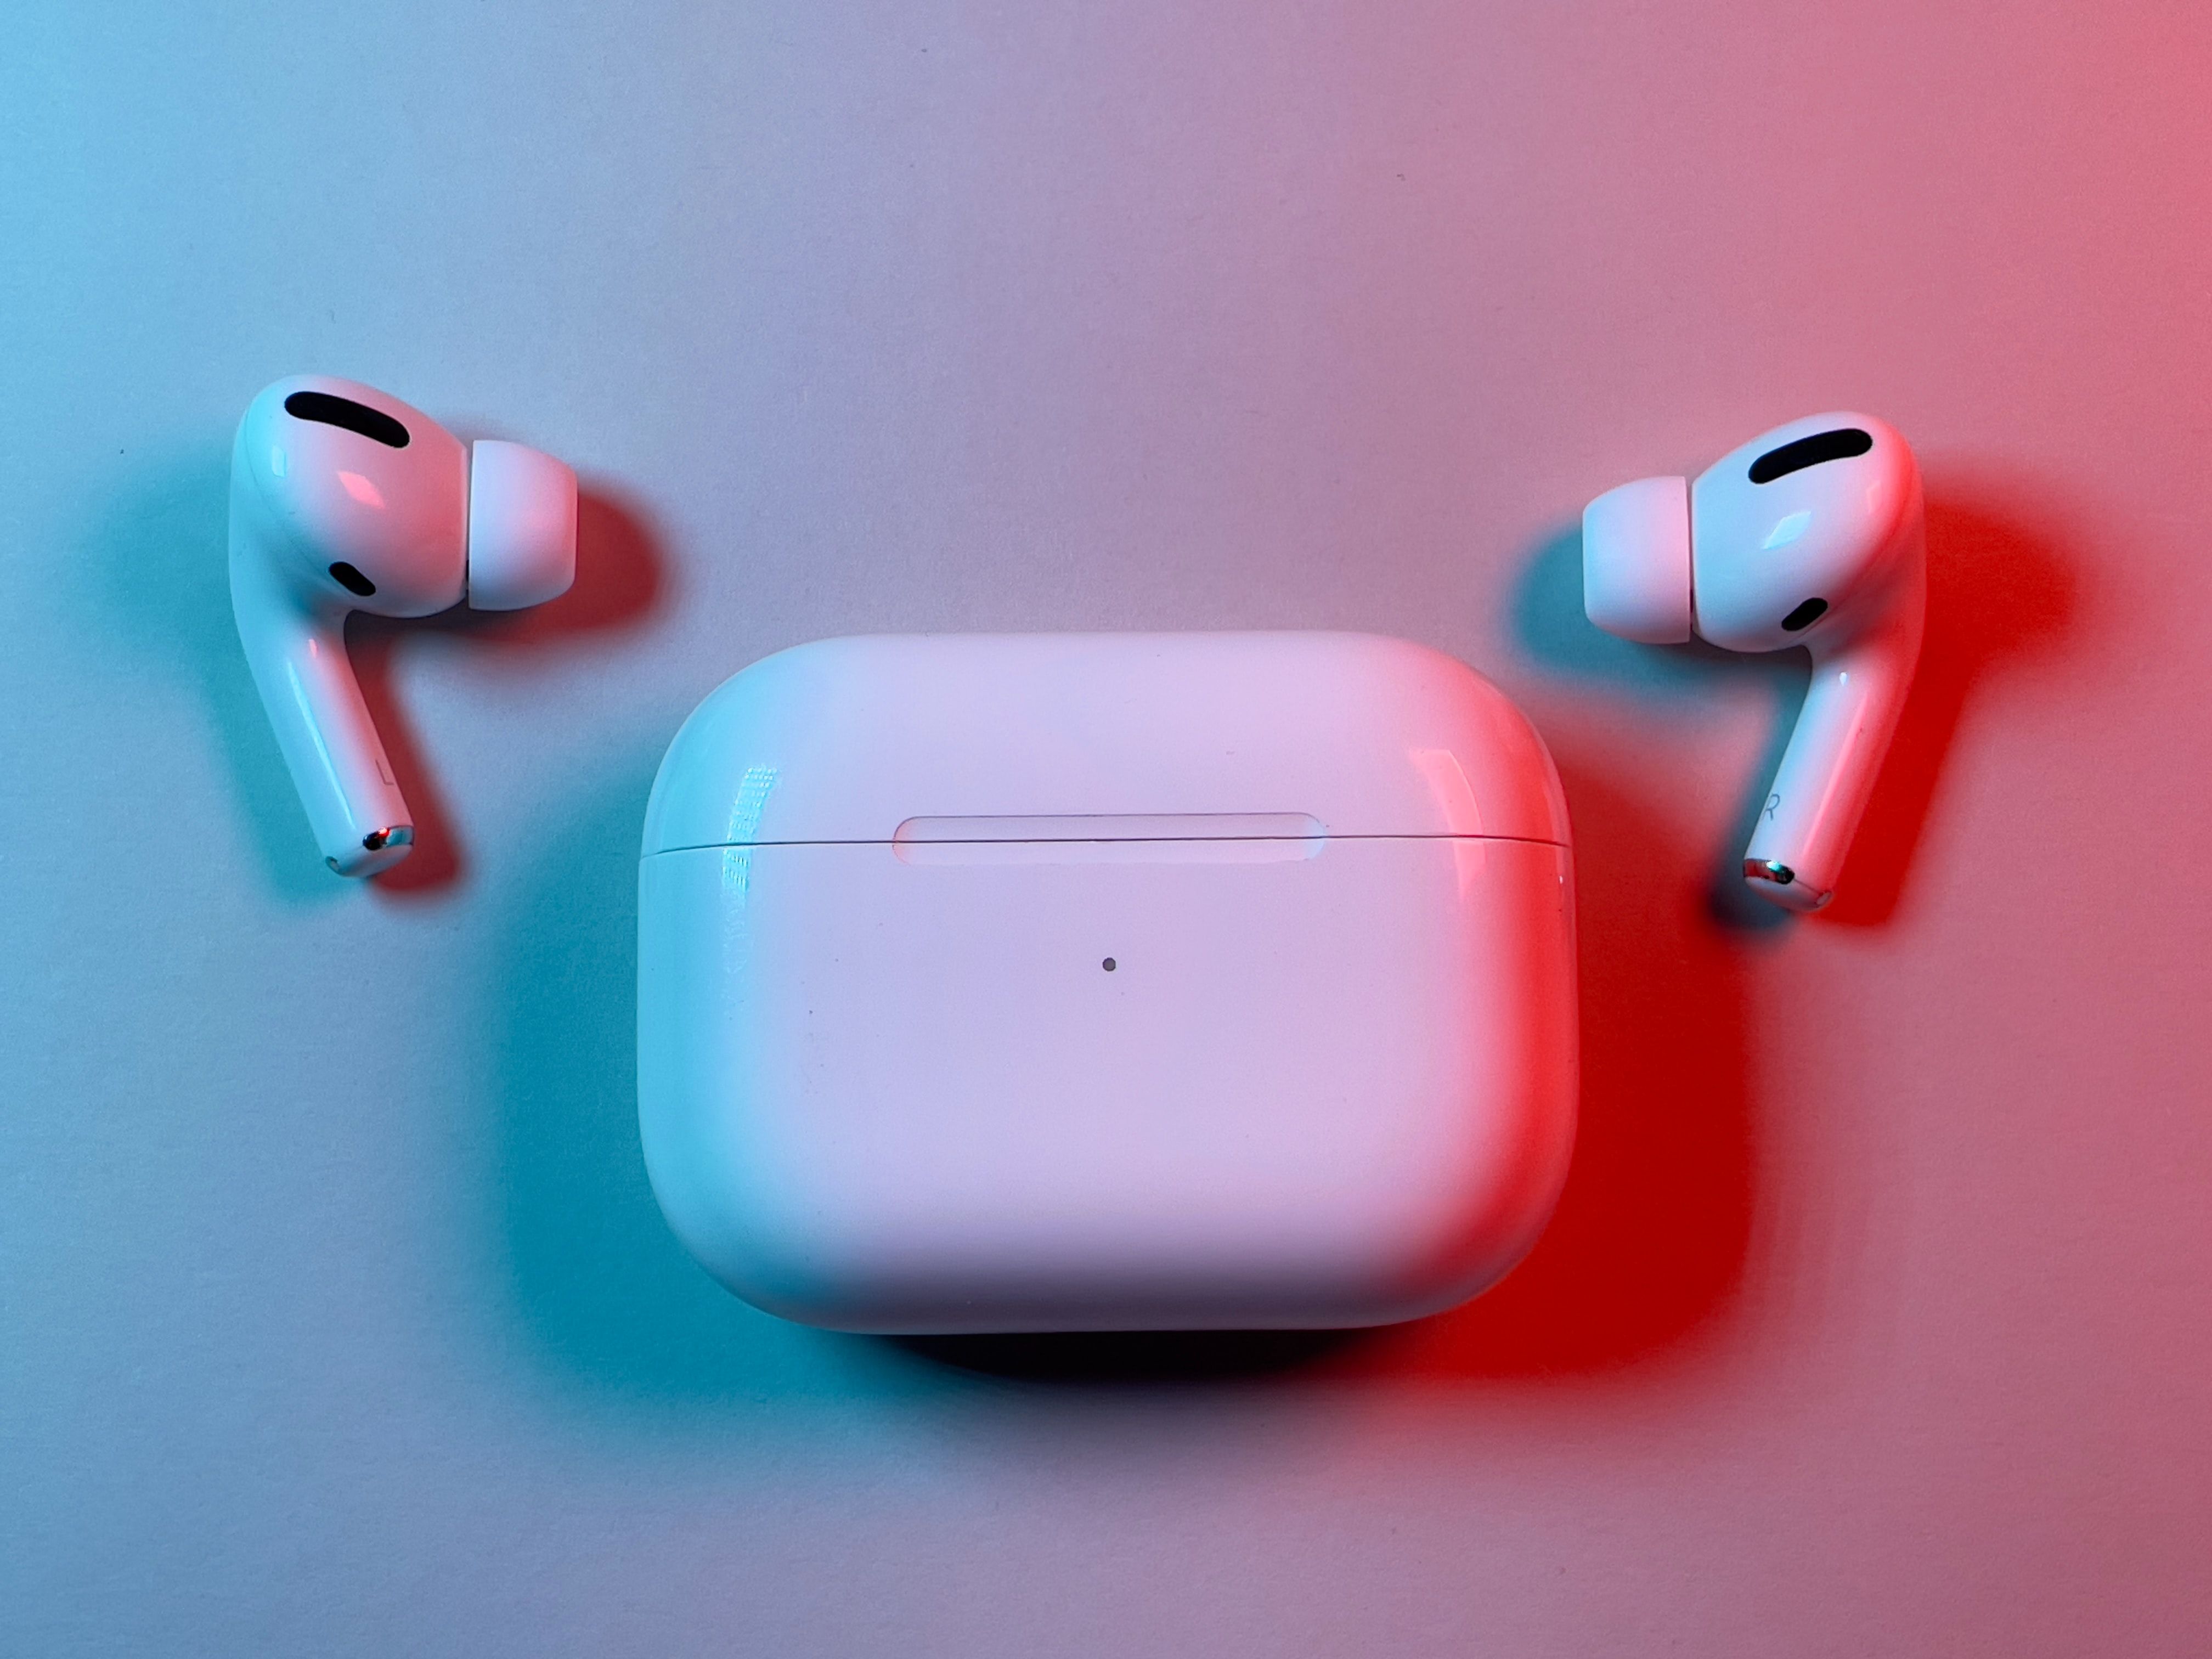 Køre ud fe nyse How to pair your AirPods to your Android phone